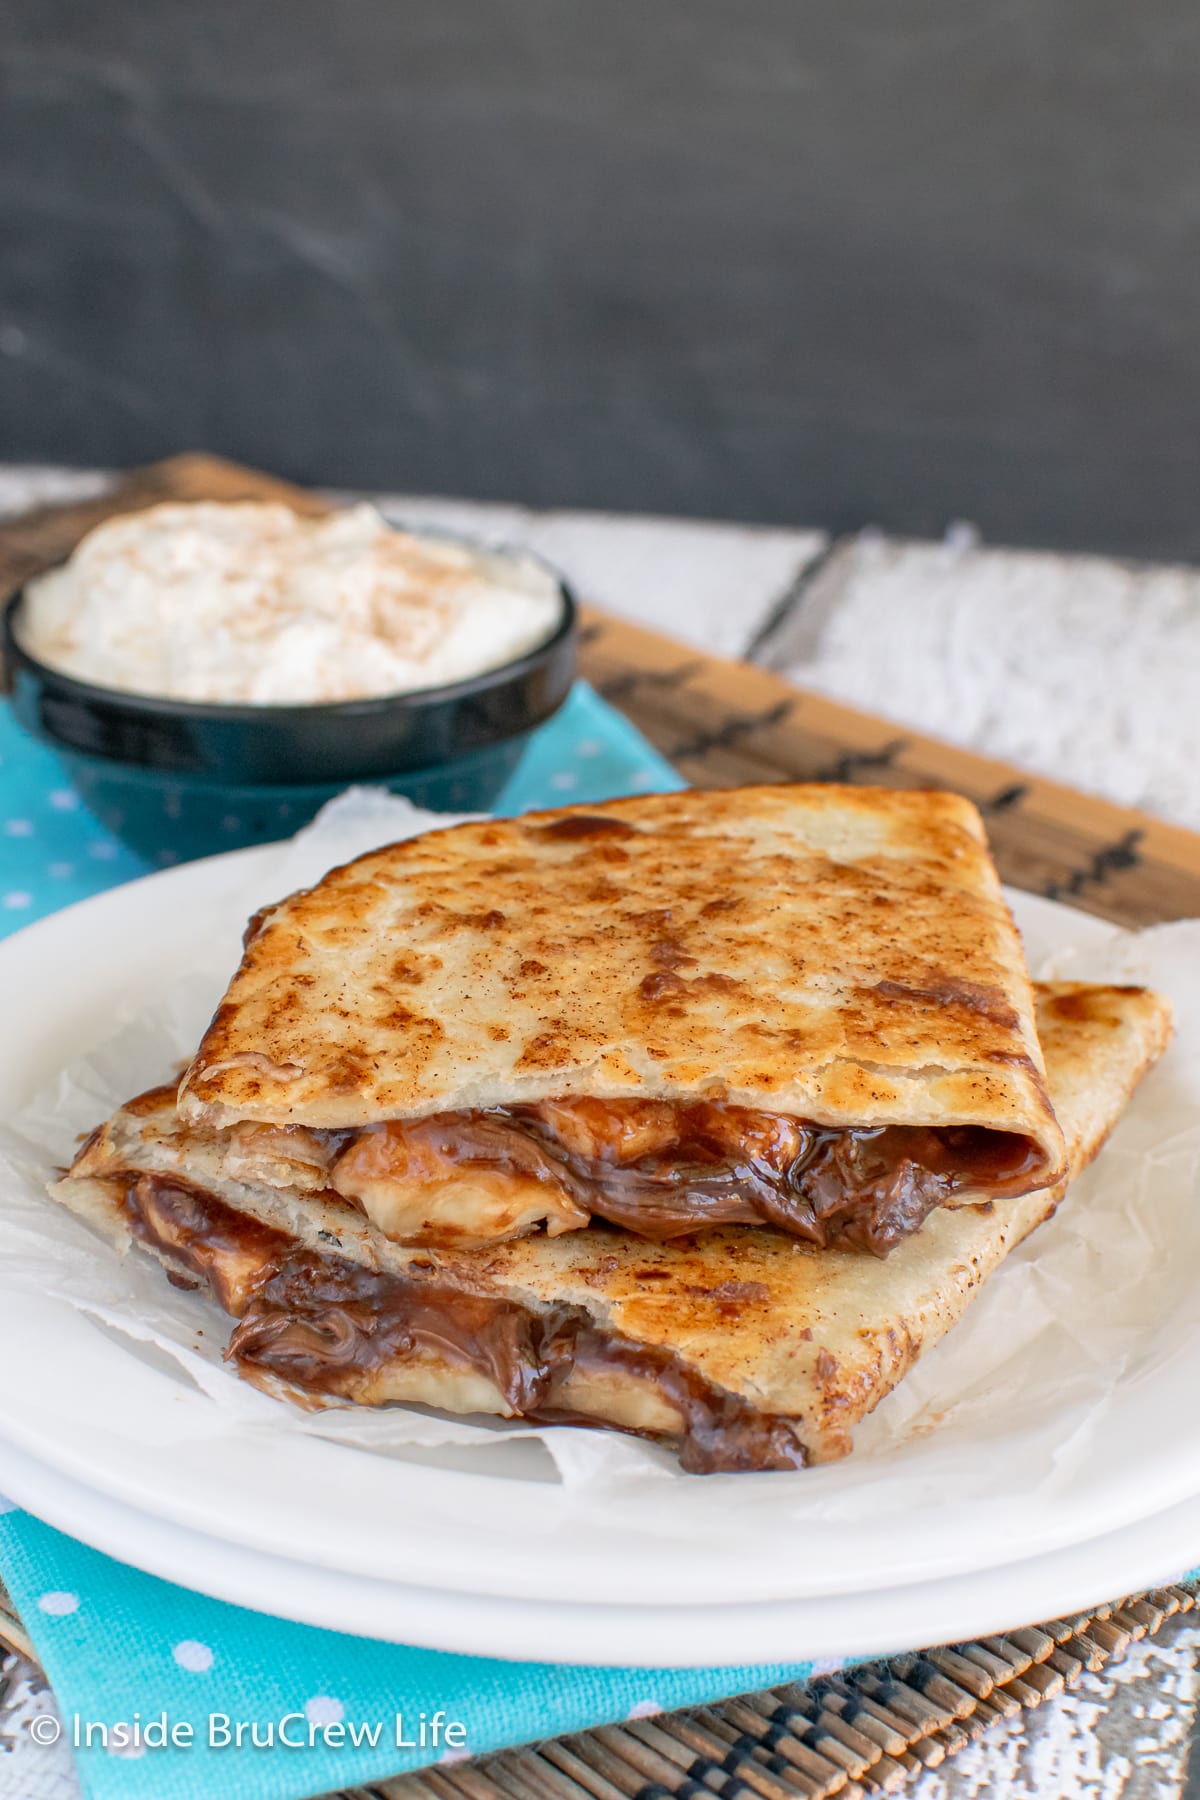 Two pan fried dessert quesadillas on a white plate.